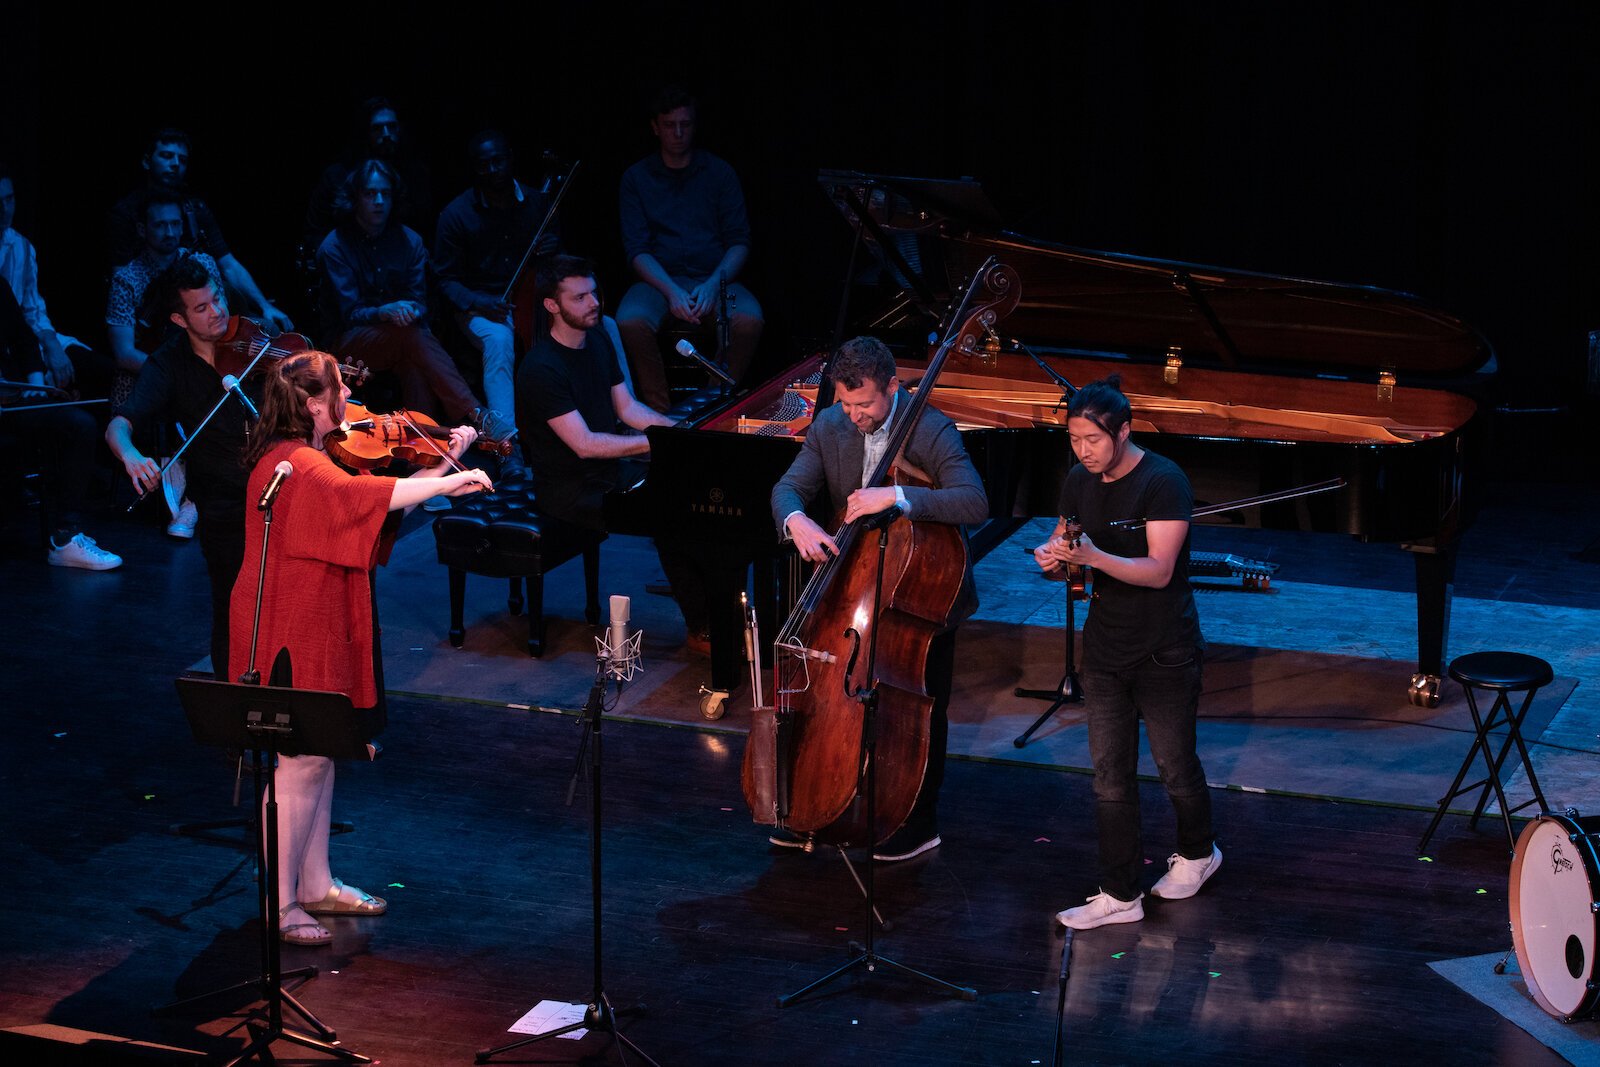 Members of the 2021 Resonance program of the Honeywell Arts Academy perform at the Eagles Theatre in Wabash.